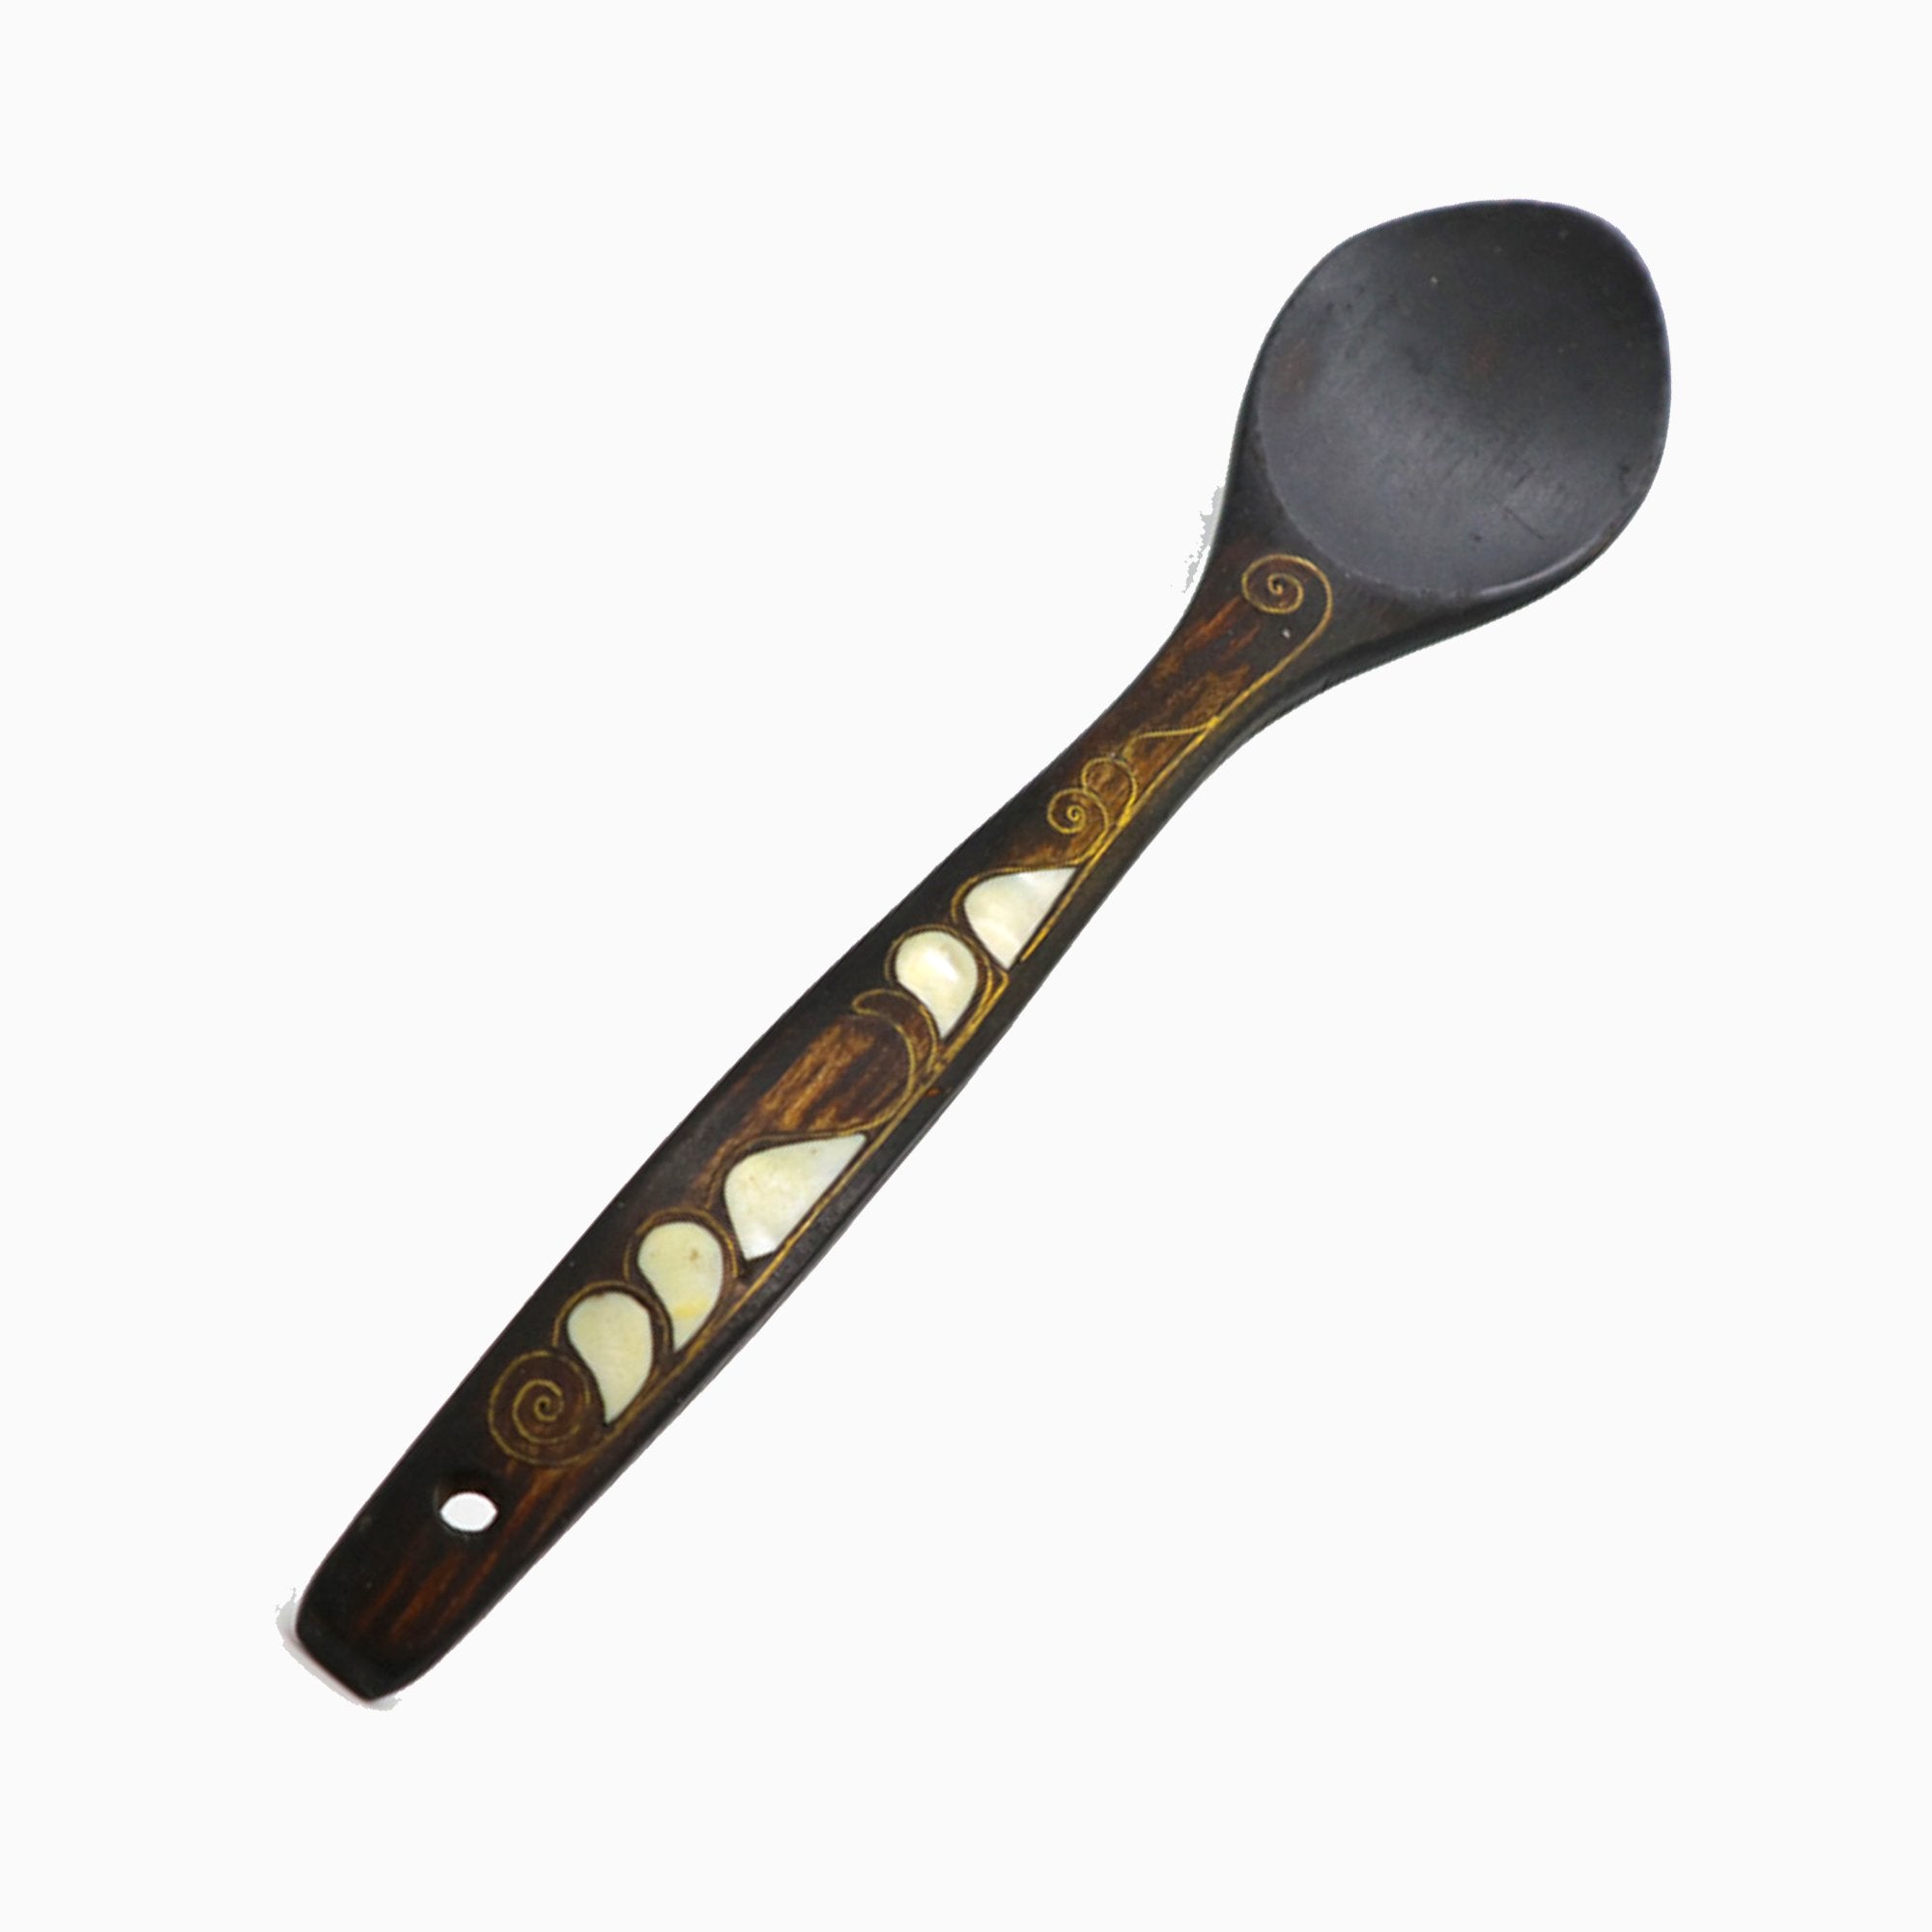 Walnut spoon, mother of pearl inlaid